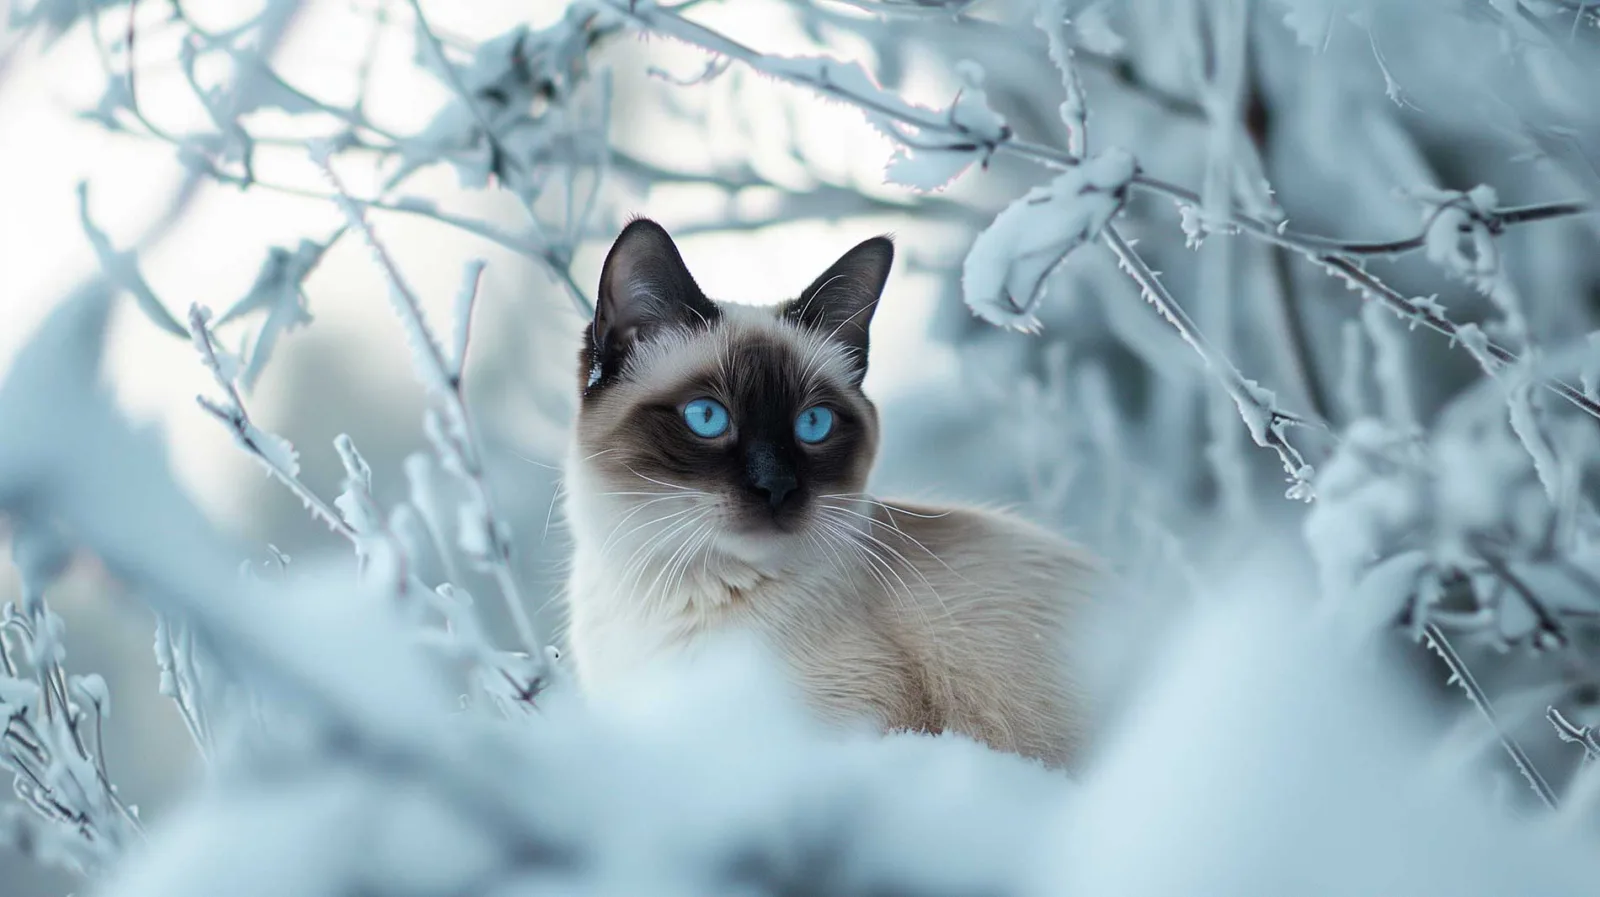 A Siamese cat with striking blue eyes and cream-colored fur with dark facial features, and ears sits amidst a snowy winter landscape. The cat's gaze is focused and alert. The background is a serene scene of snow-covered branches and icy twigs, enhancing the cold, tranquil atmosphere of the image.